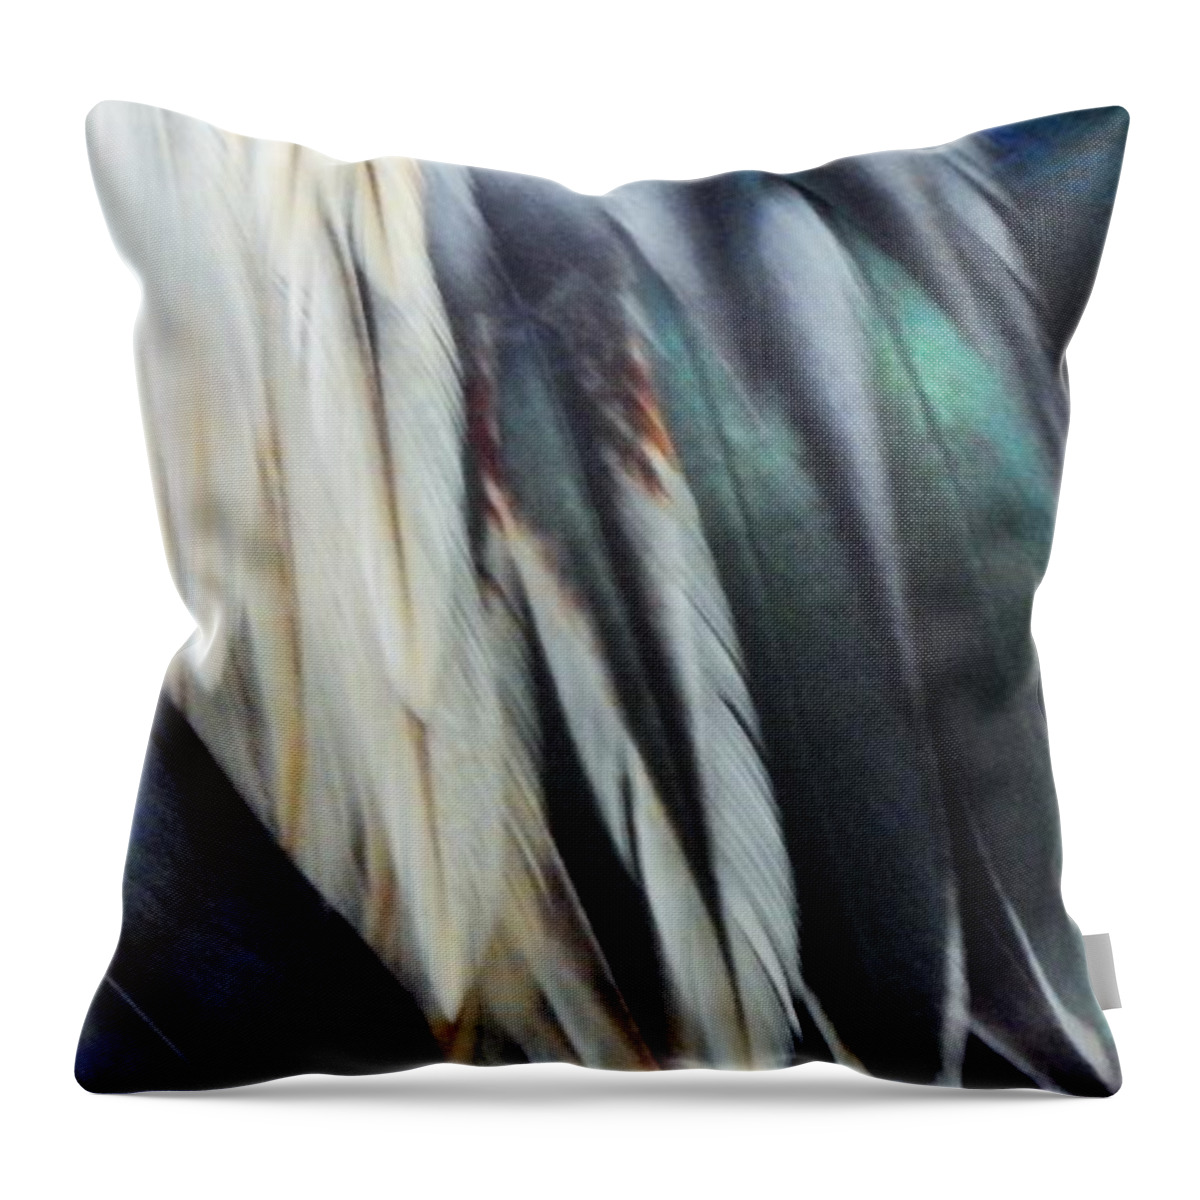 Feathers Throw Pillow featuring the photograph Abstract Feather Art by Jan Gelders 